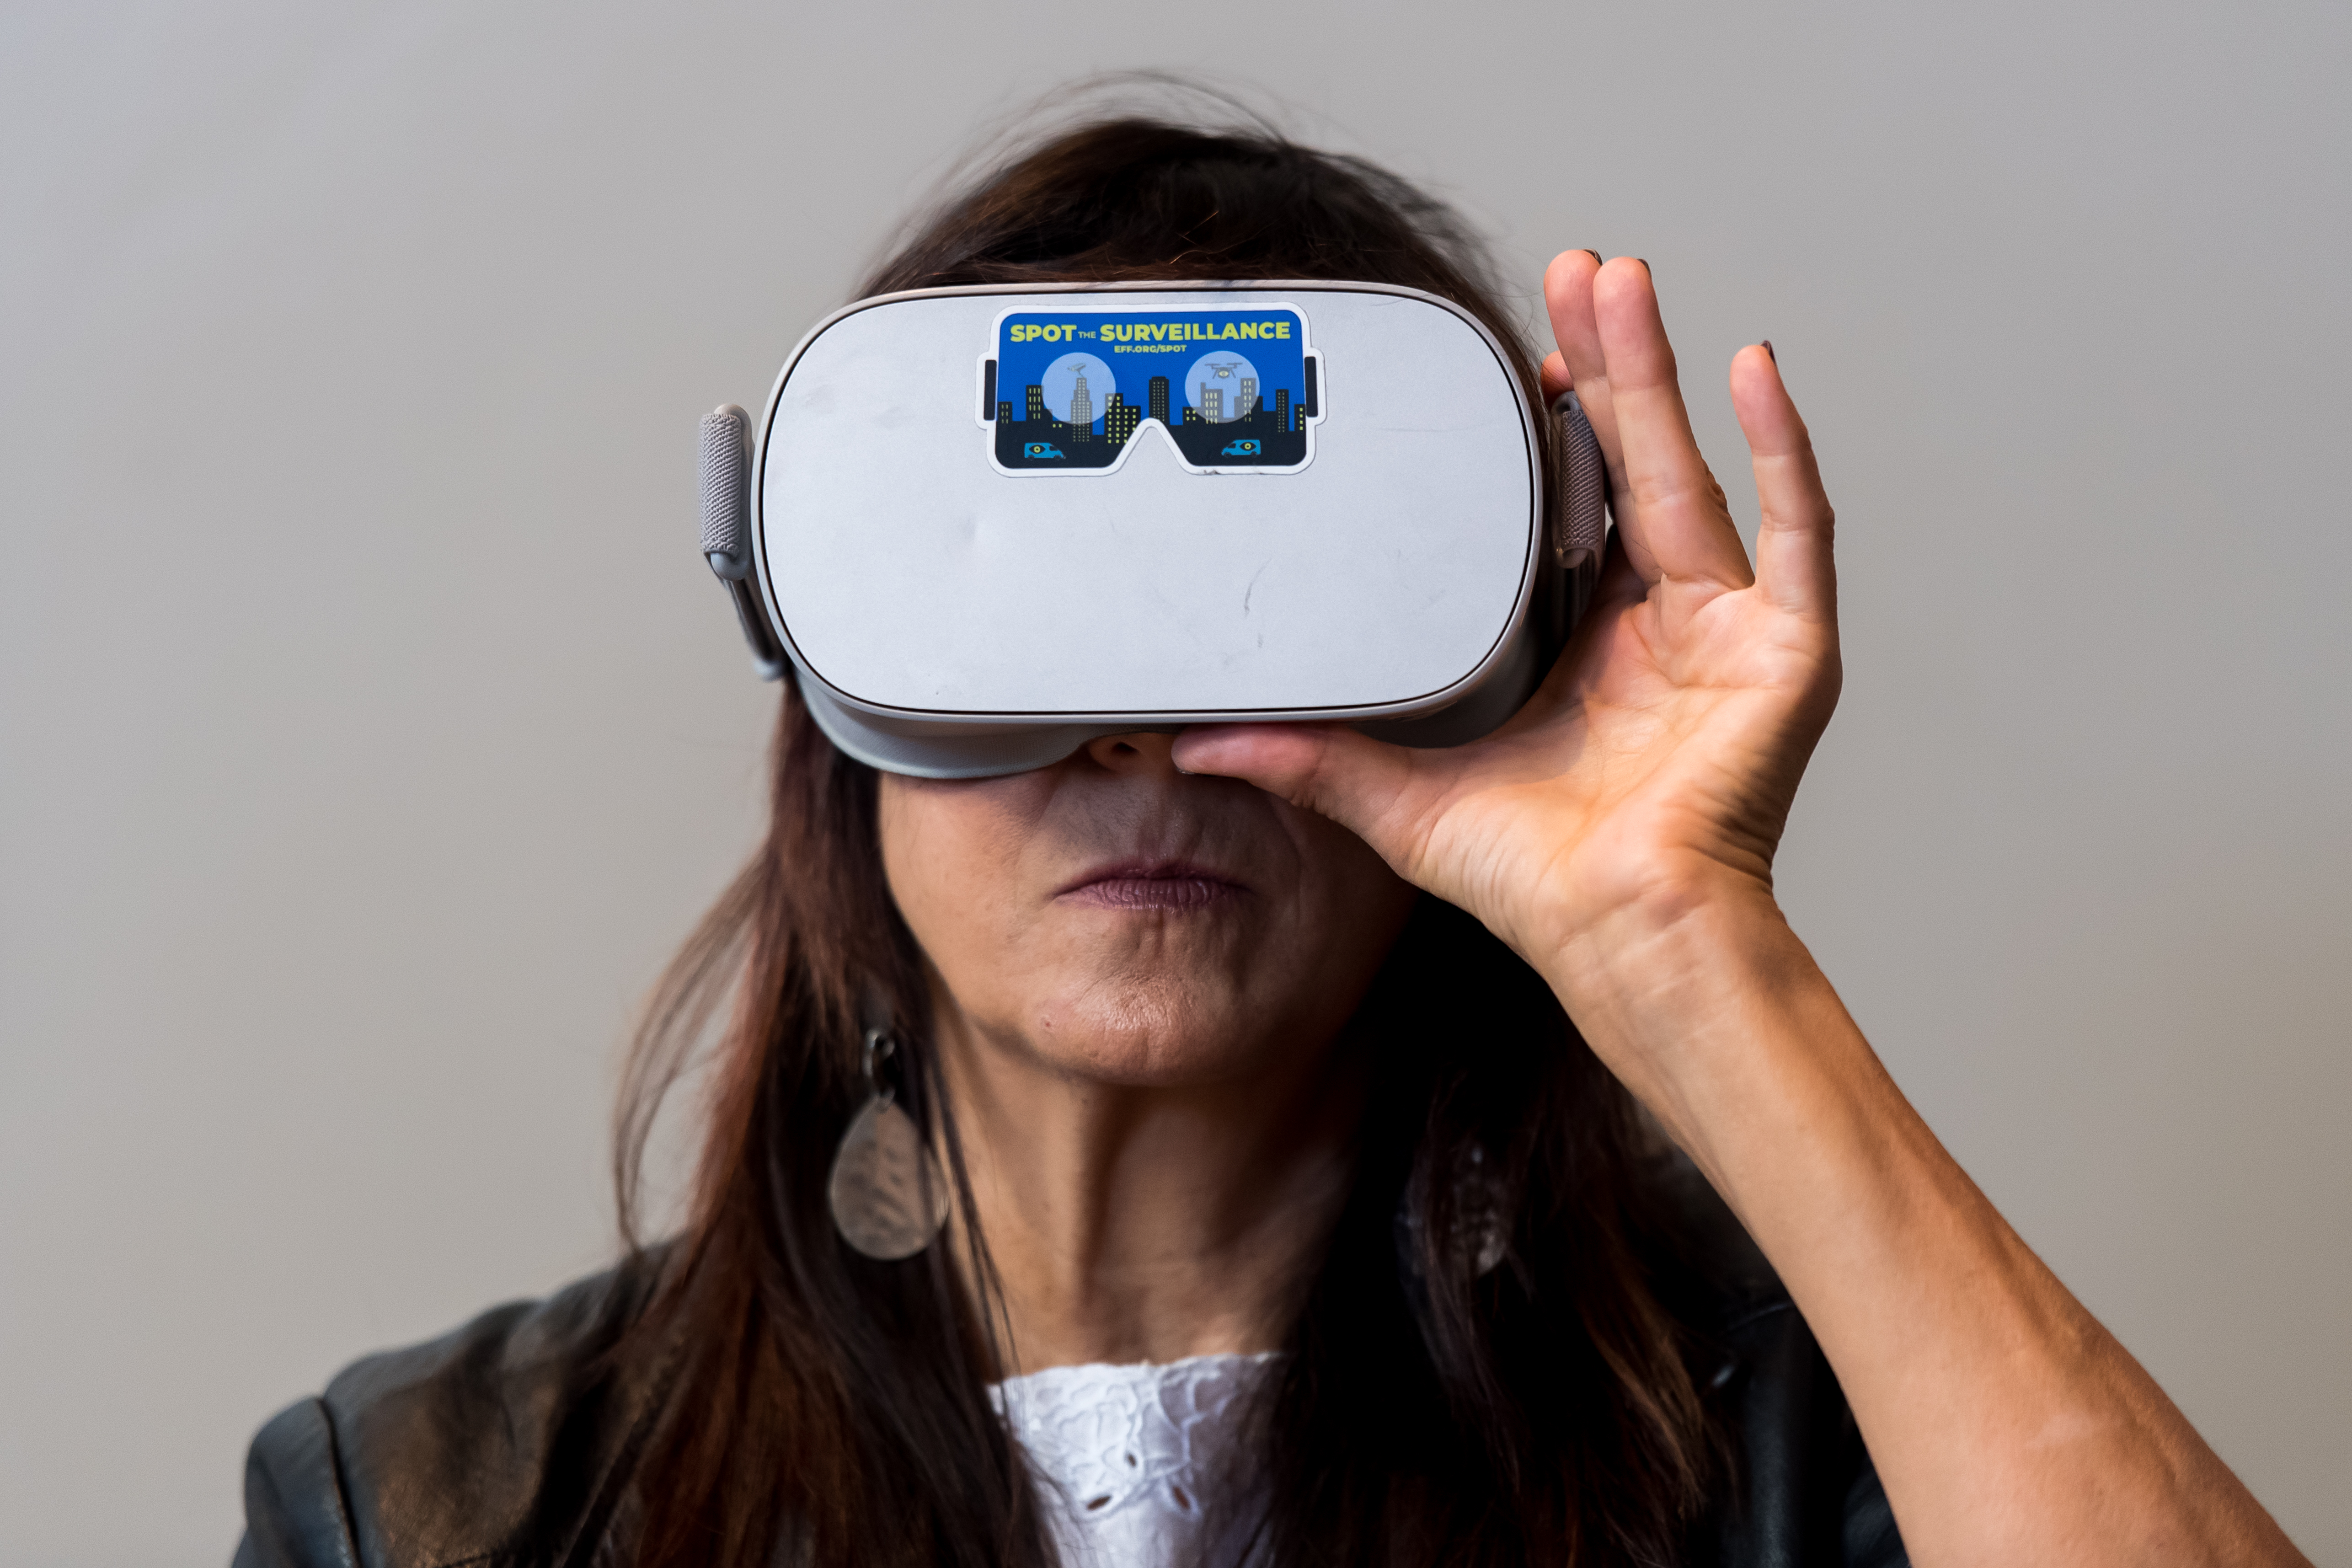 An attendee at the Journalism 360 Immersive Storytelling Festival is experiencing Electronic Frontier Foundation's Spot the Surveillance project through a virtual reality headset.